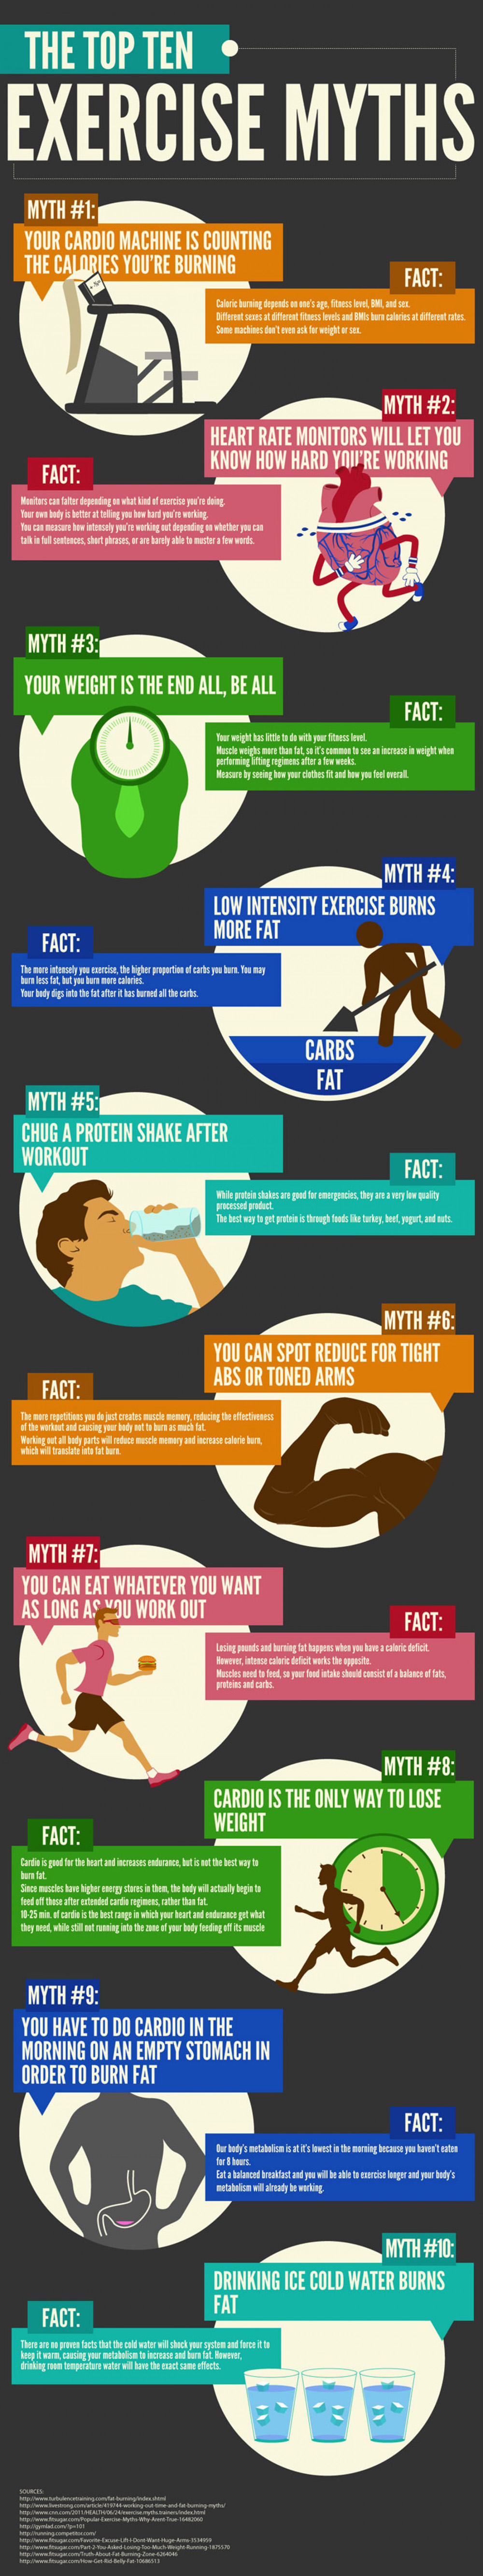 top-10-exercise-myths_5029118410866_w1000